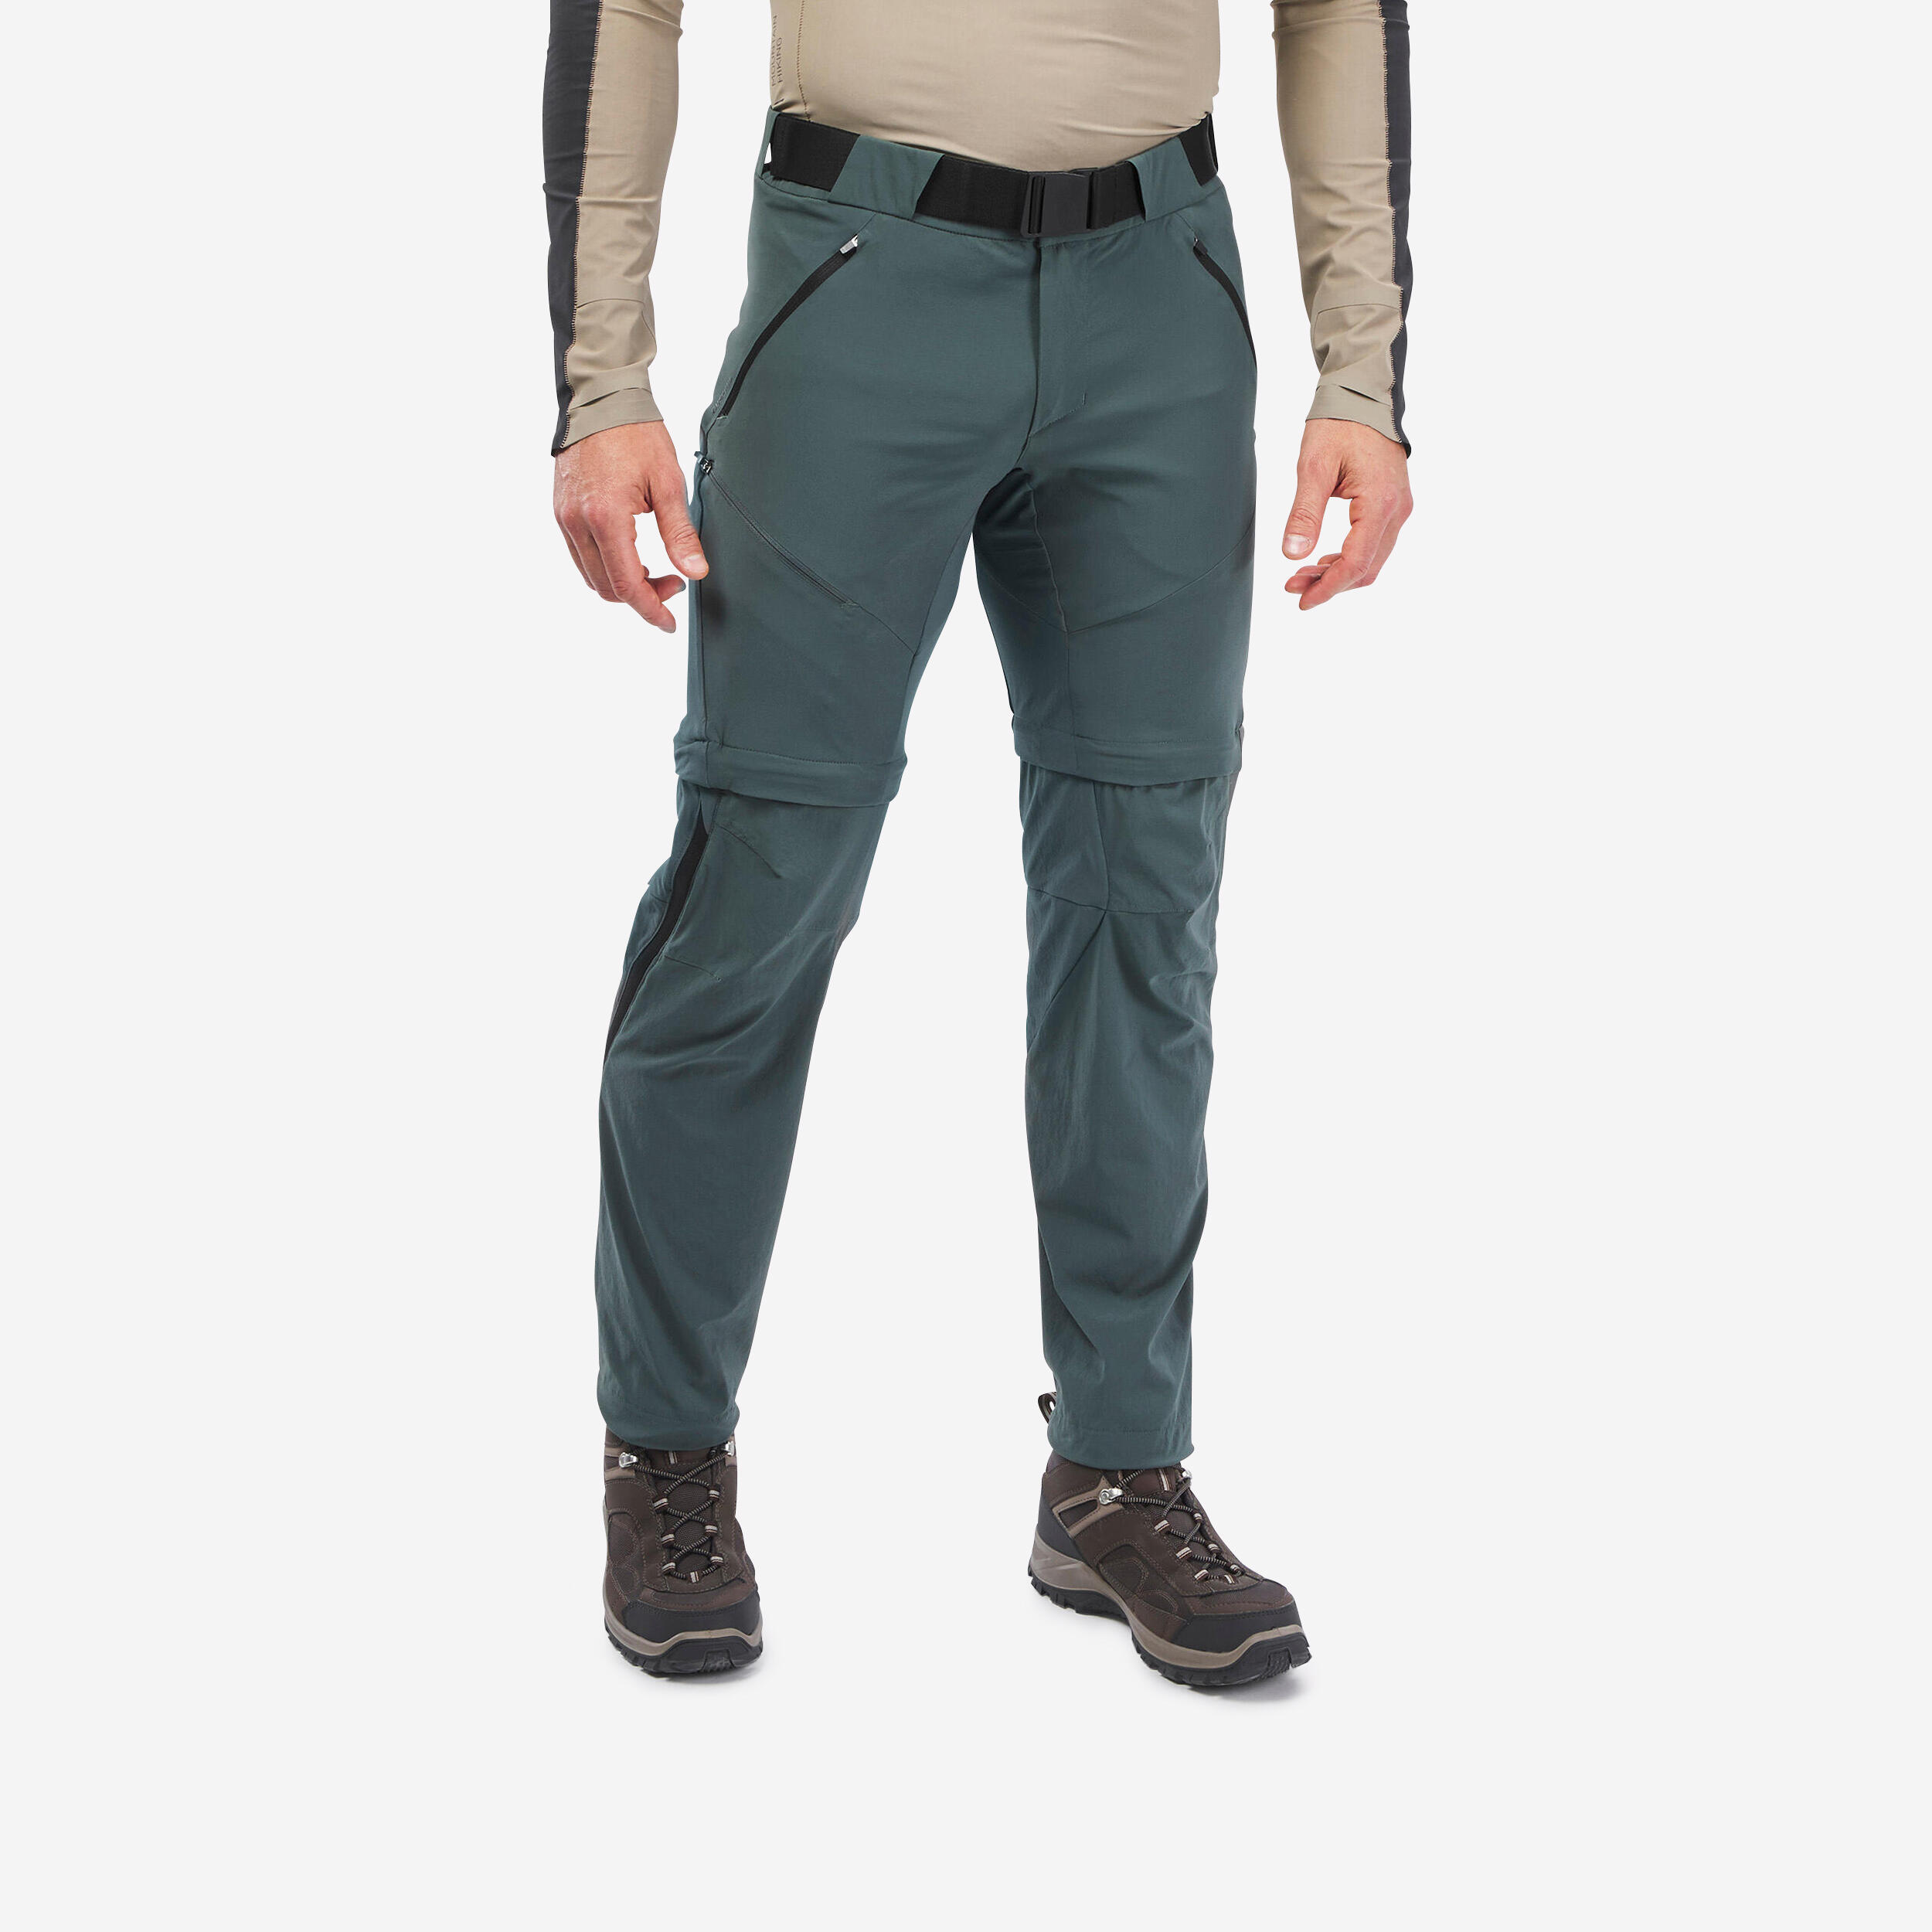 63% OFF on QUECHUA Arpenaz 100 Men's Convertible Hiking Trousers By  Decathlon on Snapdeal | PaisaWapas.com